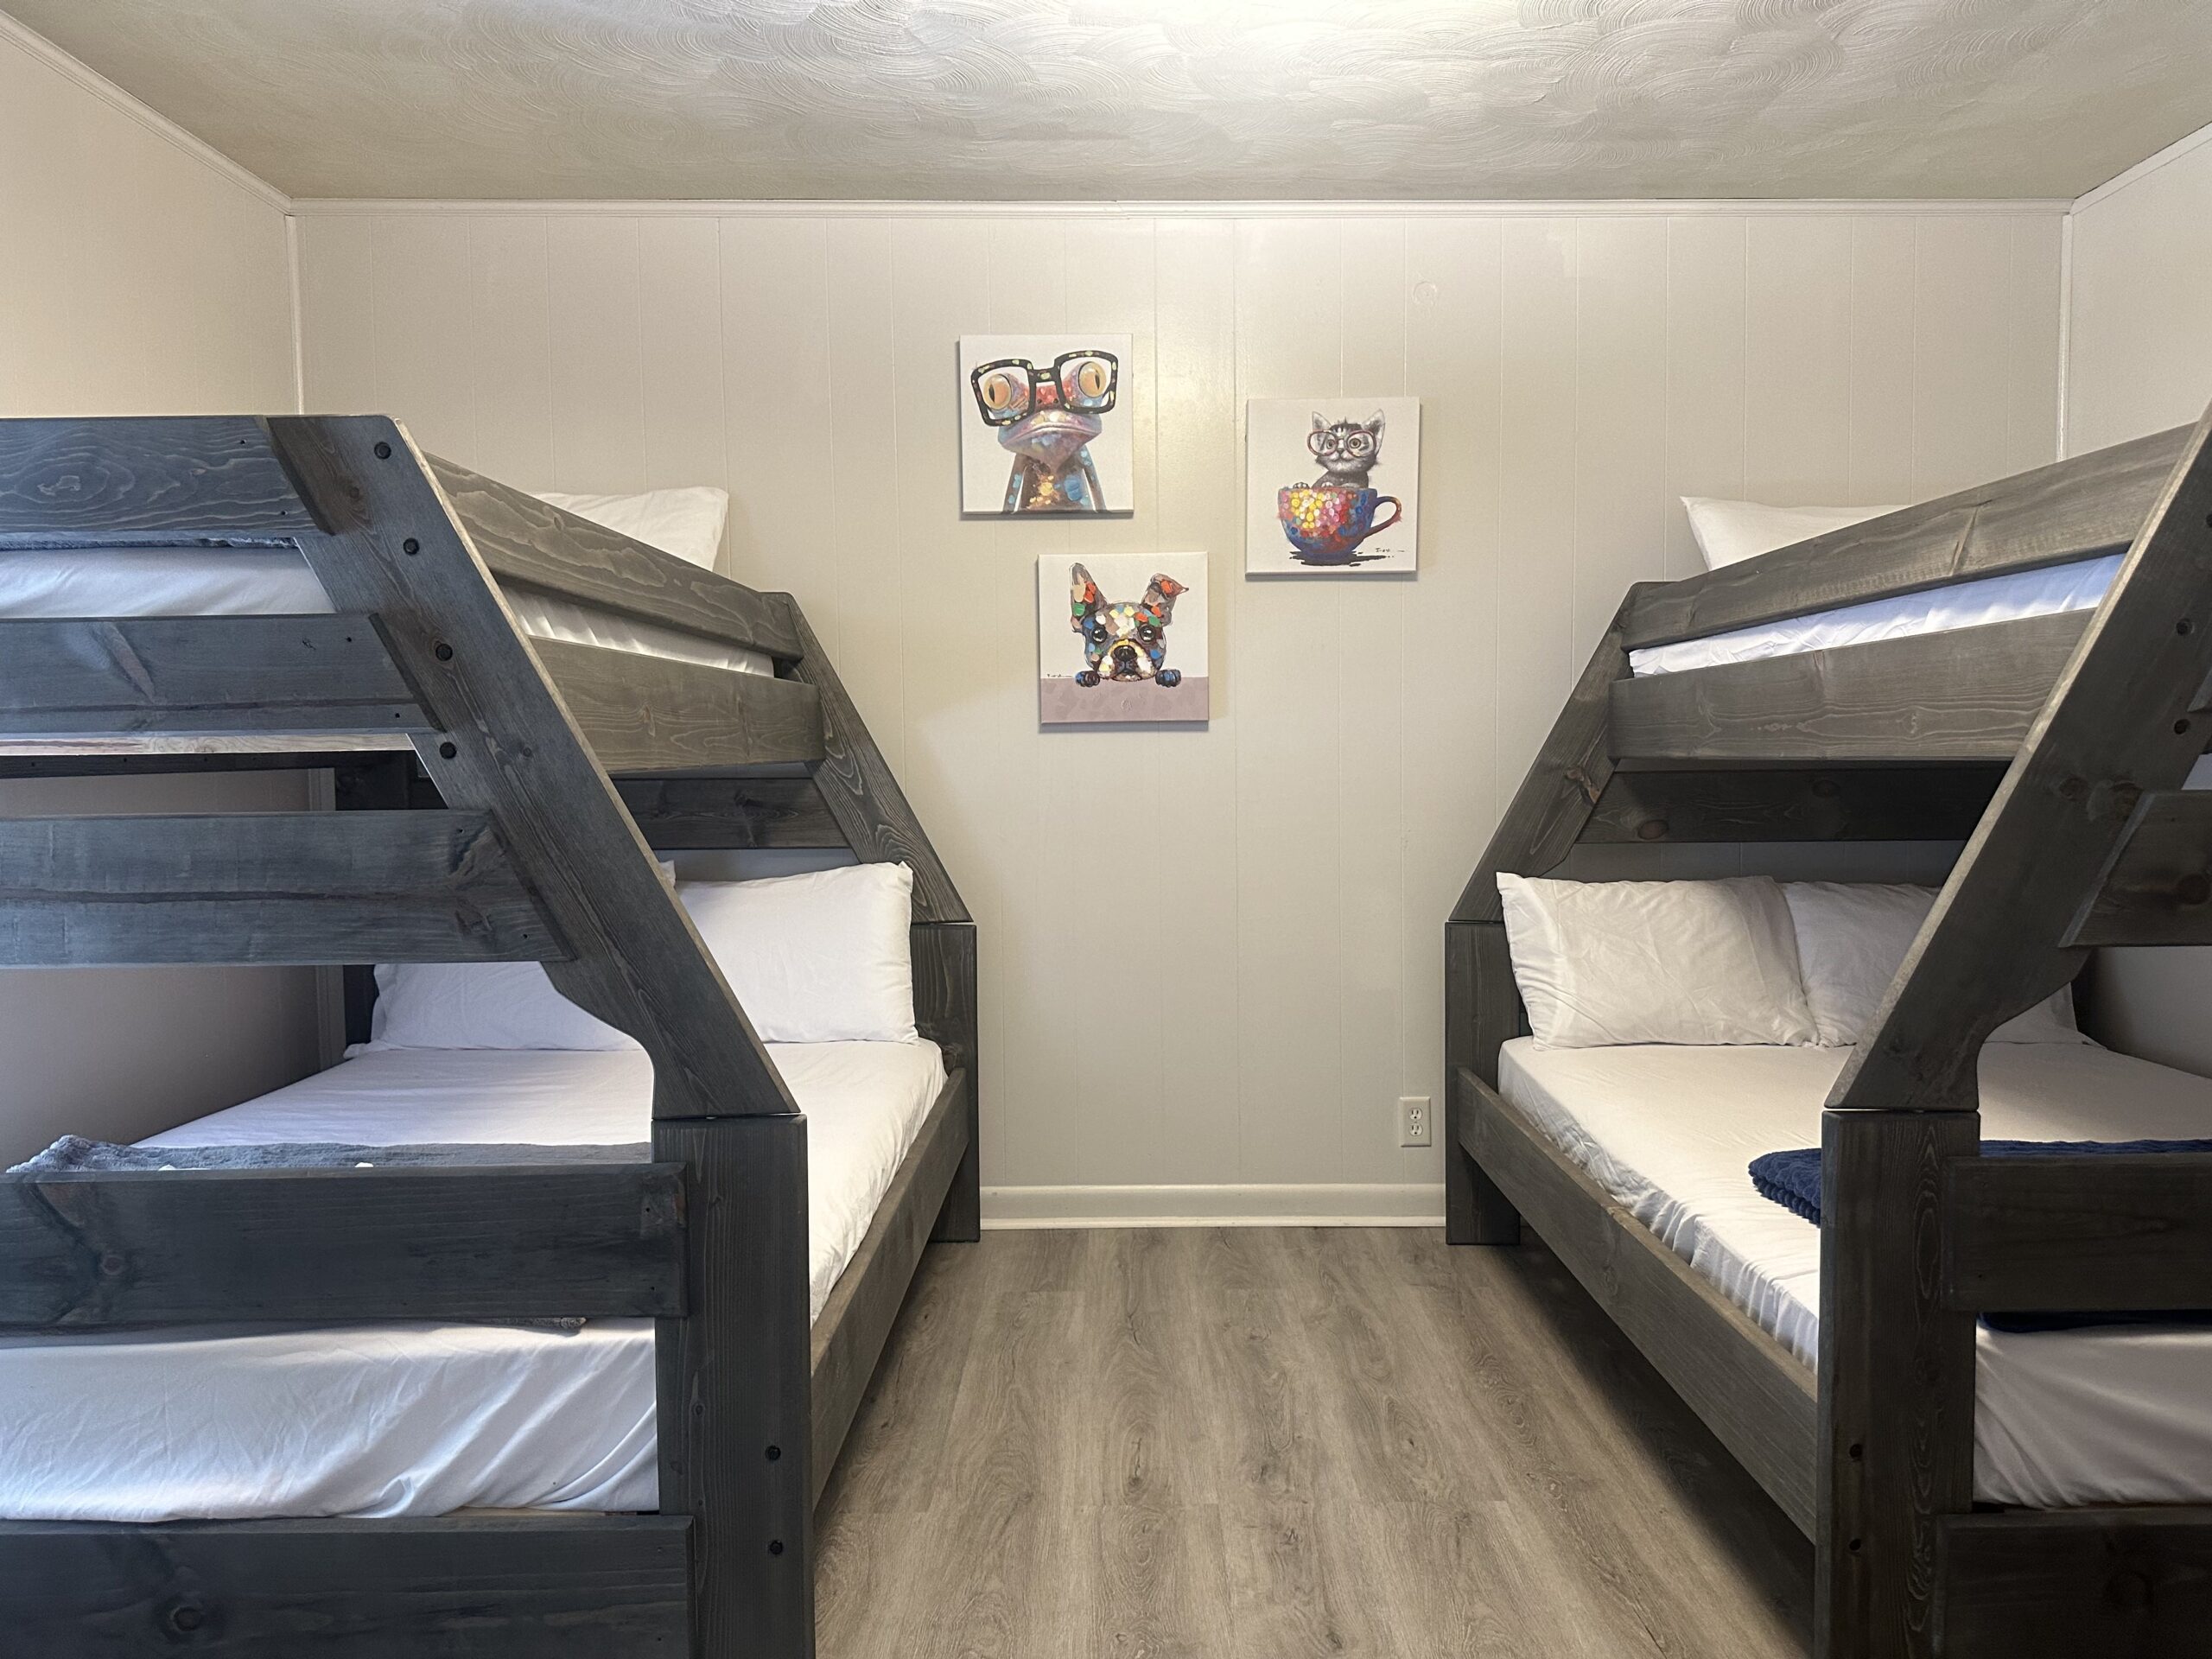 three bunk beds in a small room with wood flooring